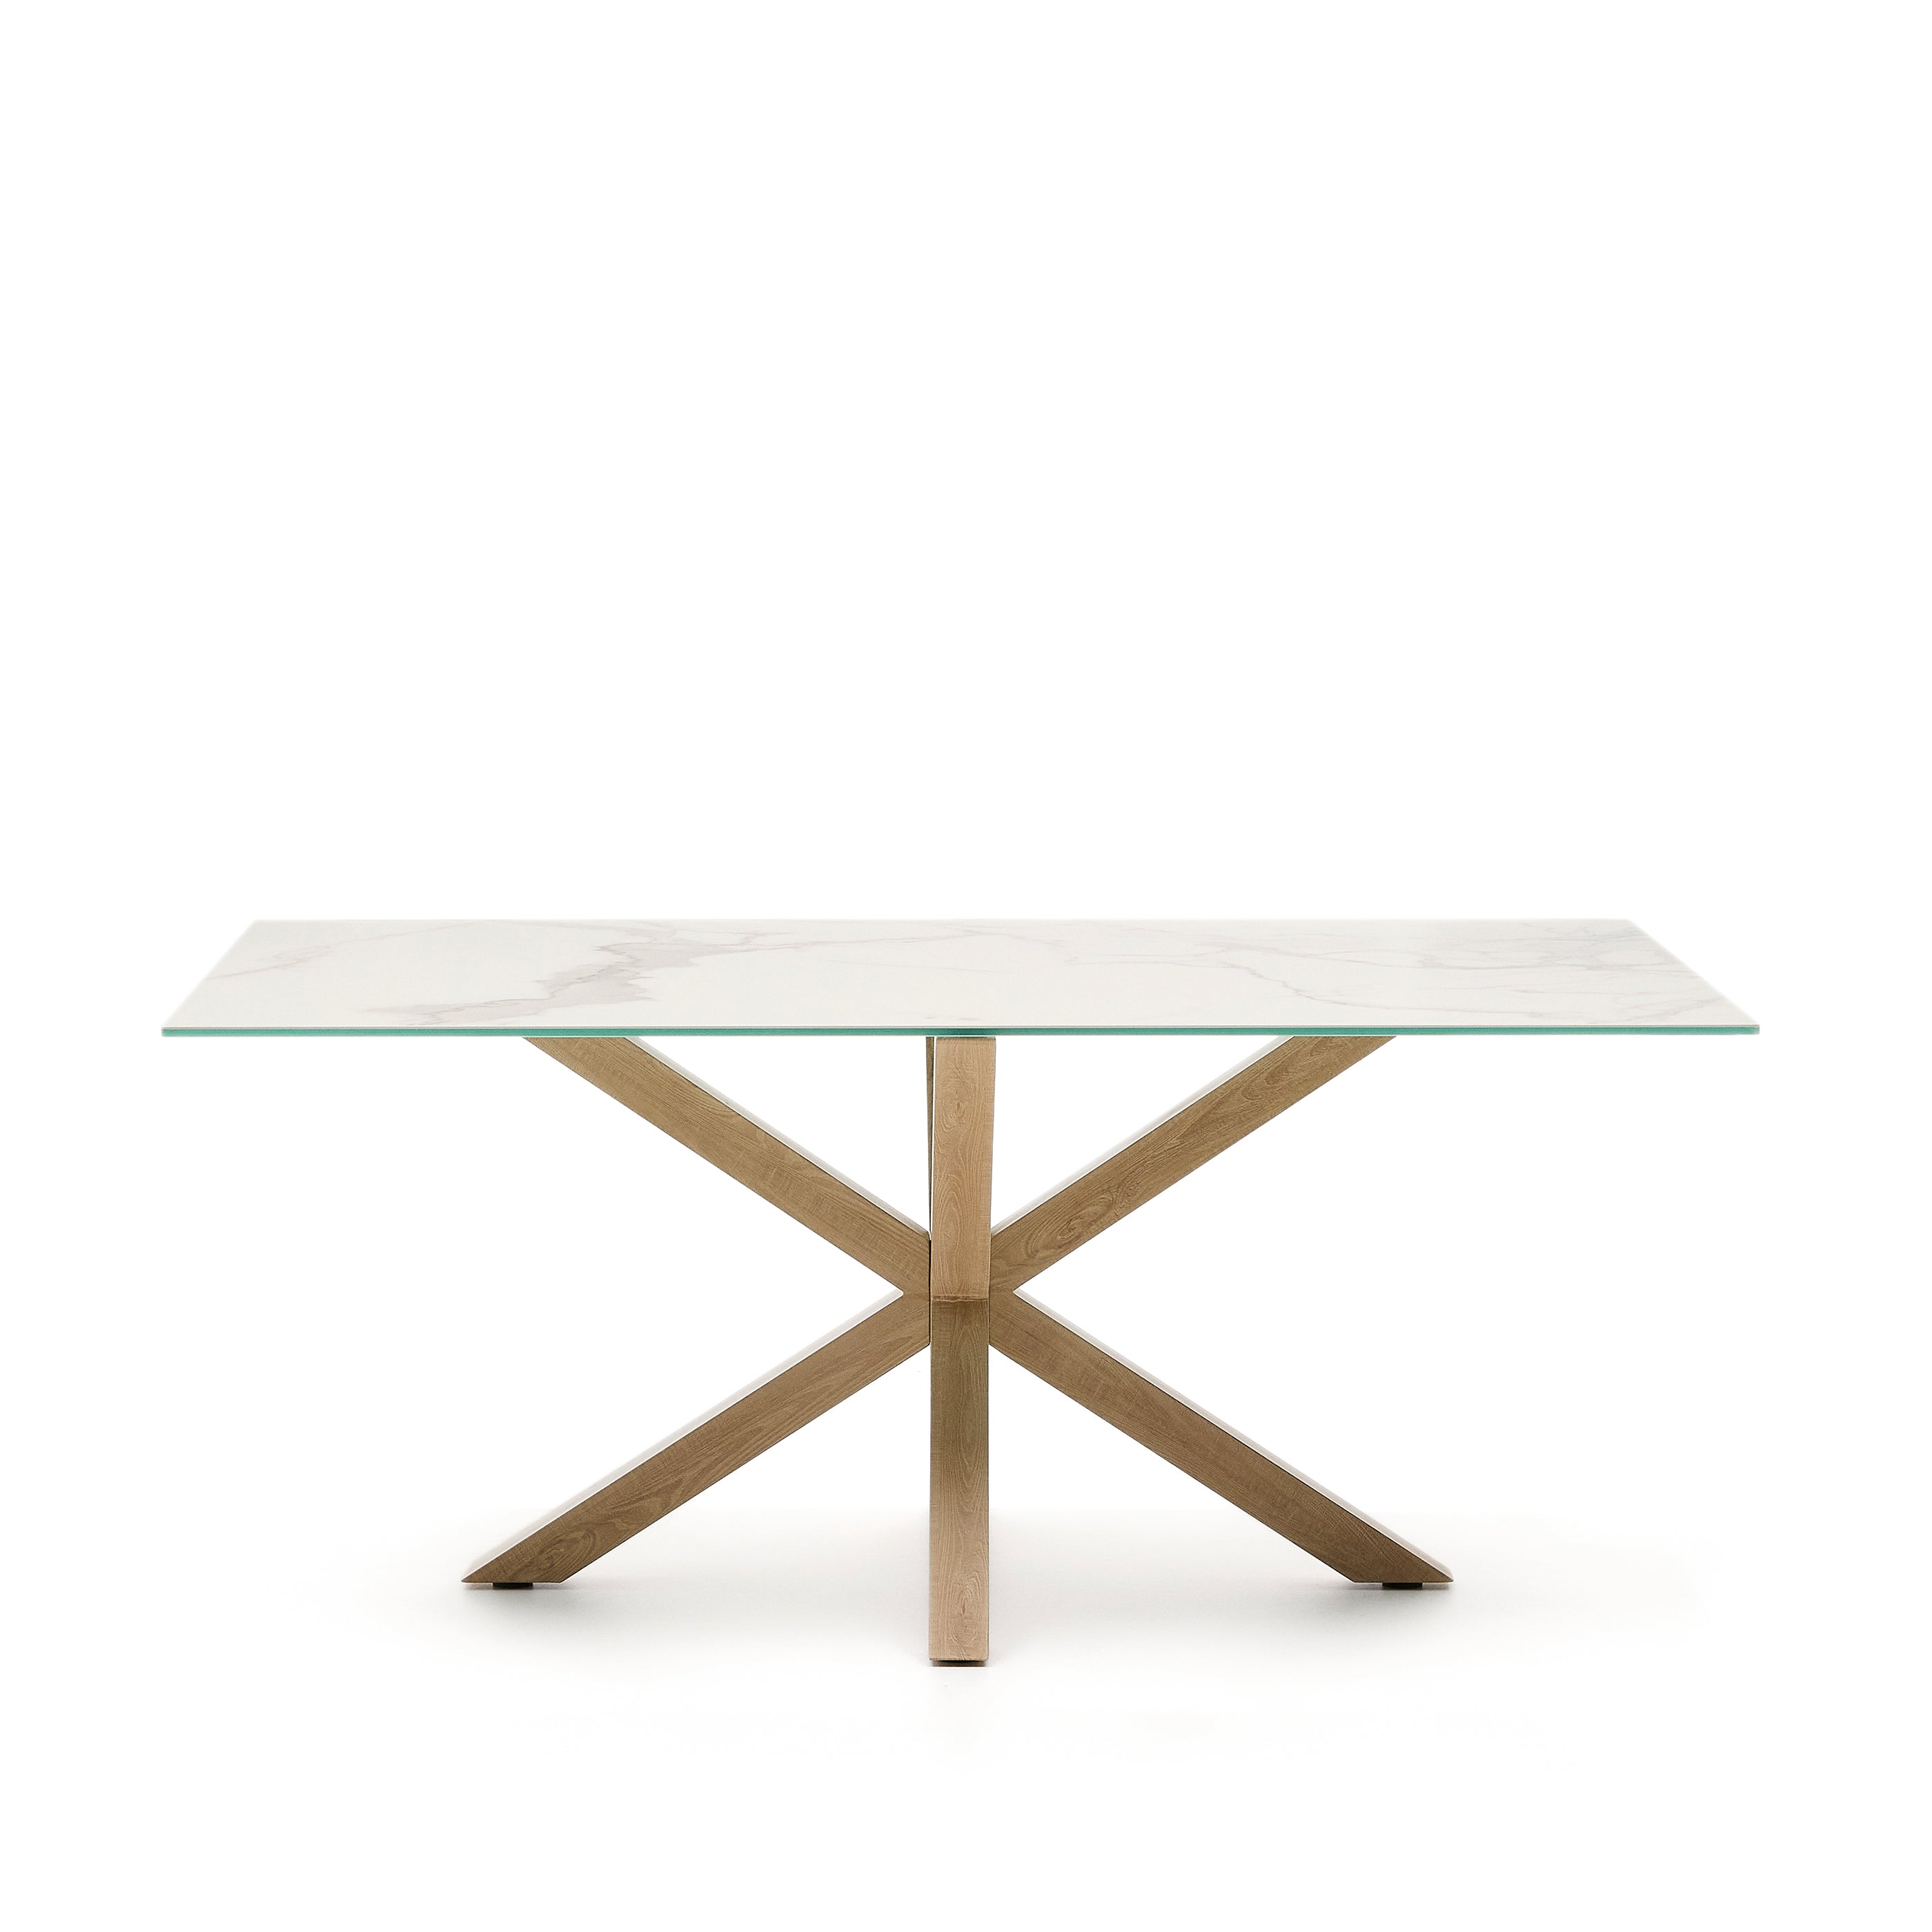 Argo table made of white Kalos porcelain and wood effect steel legs 180 x 100 cm